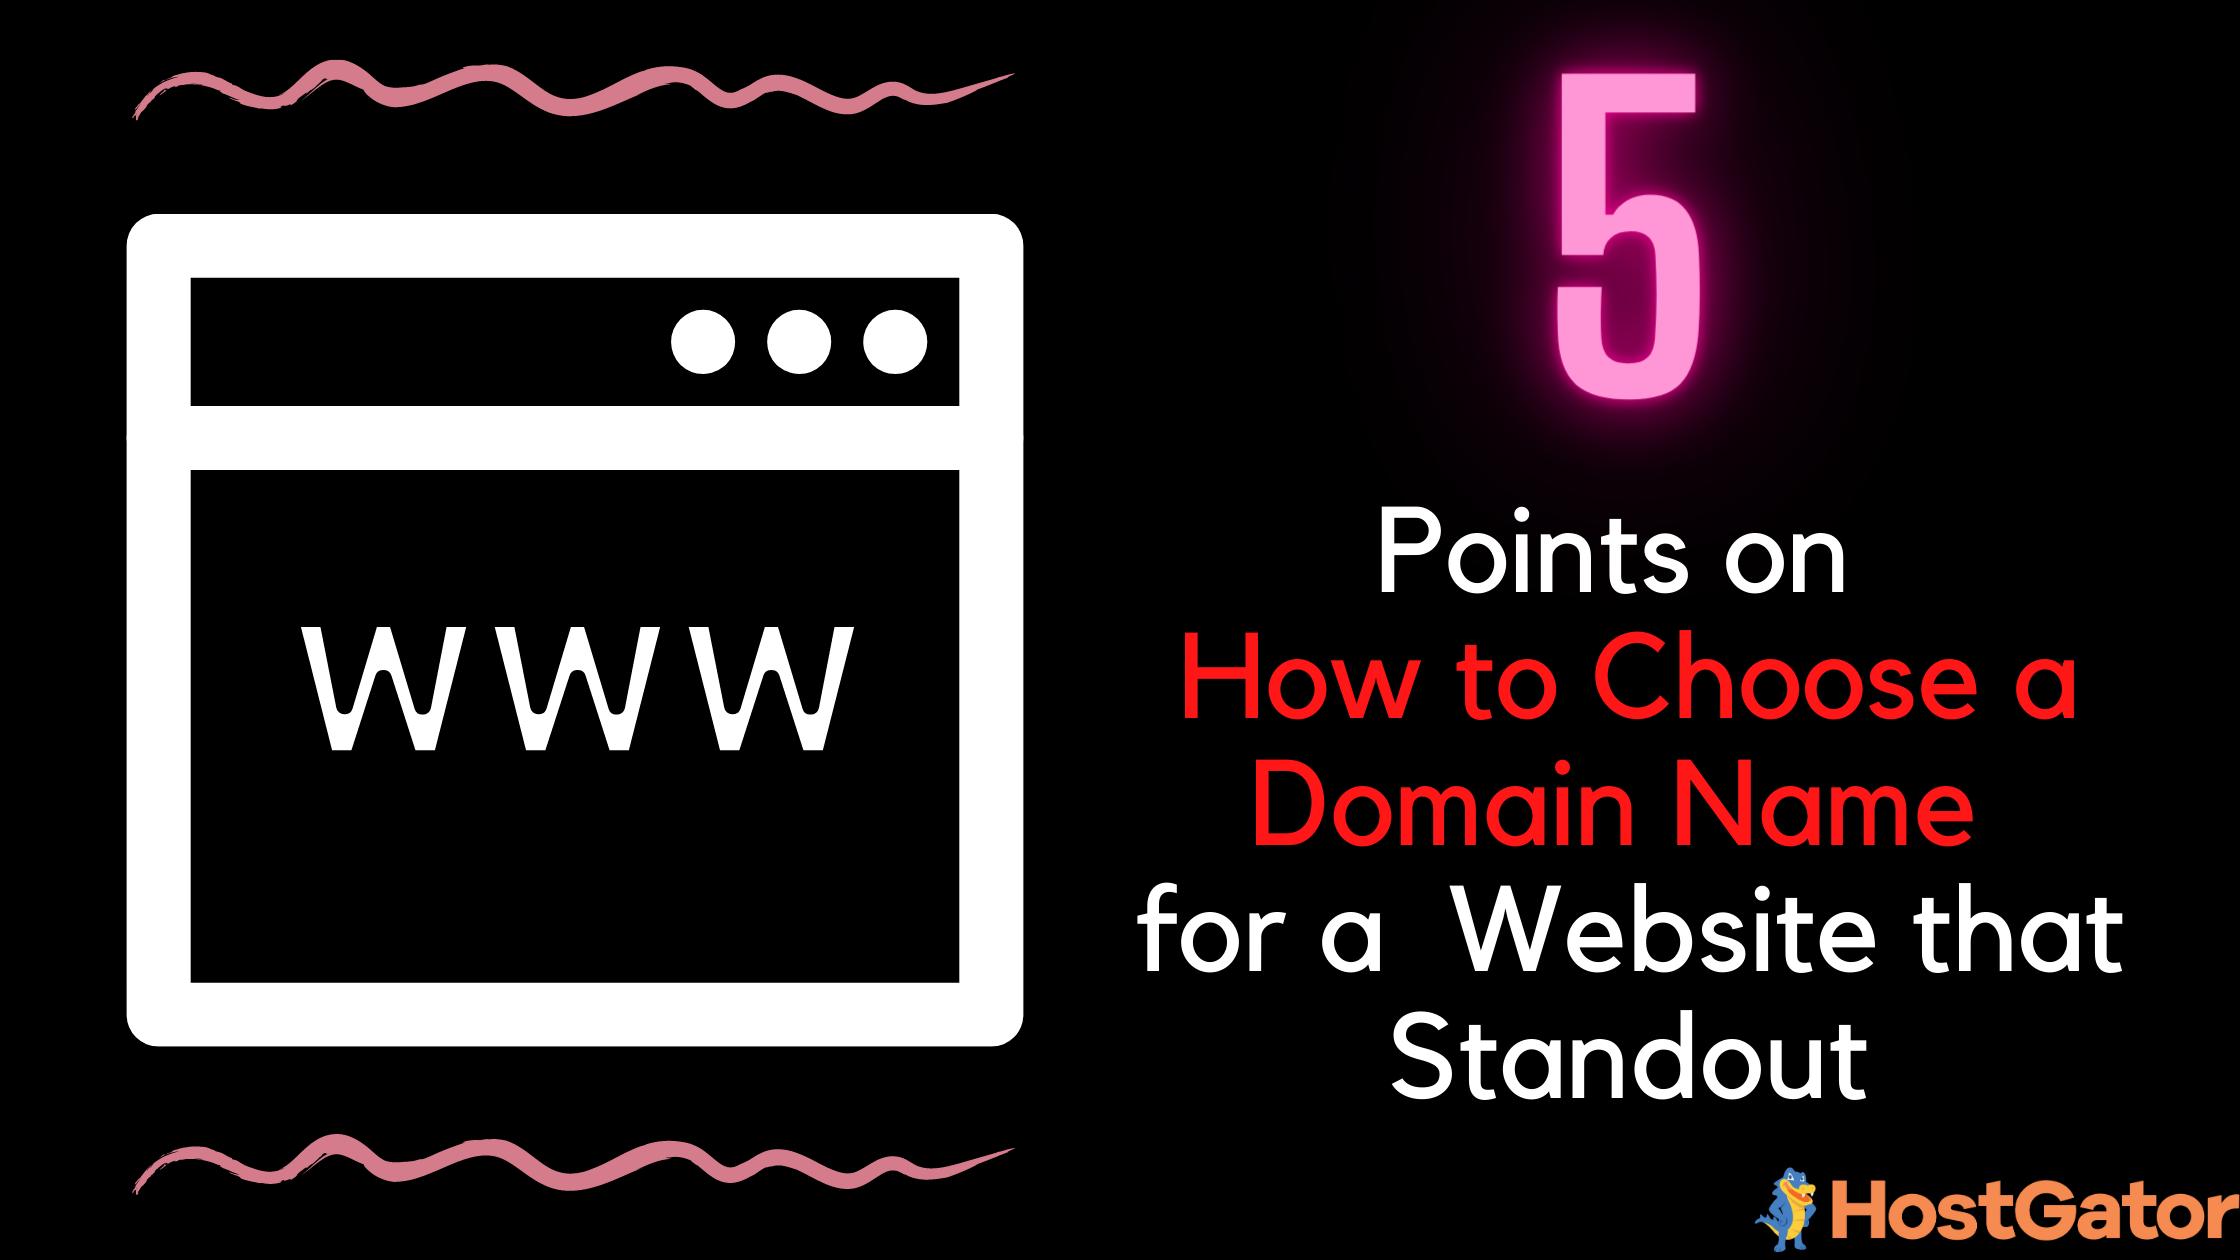 5 Points on How to Choose a Domain Name for a Website that Standout